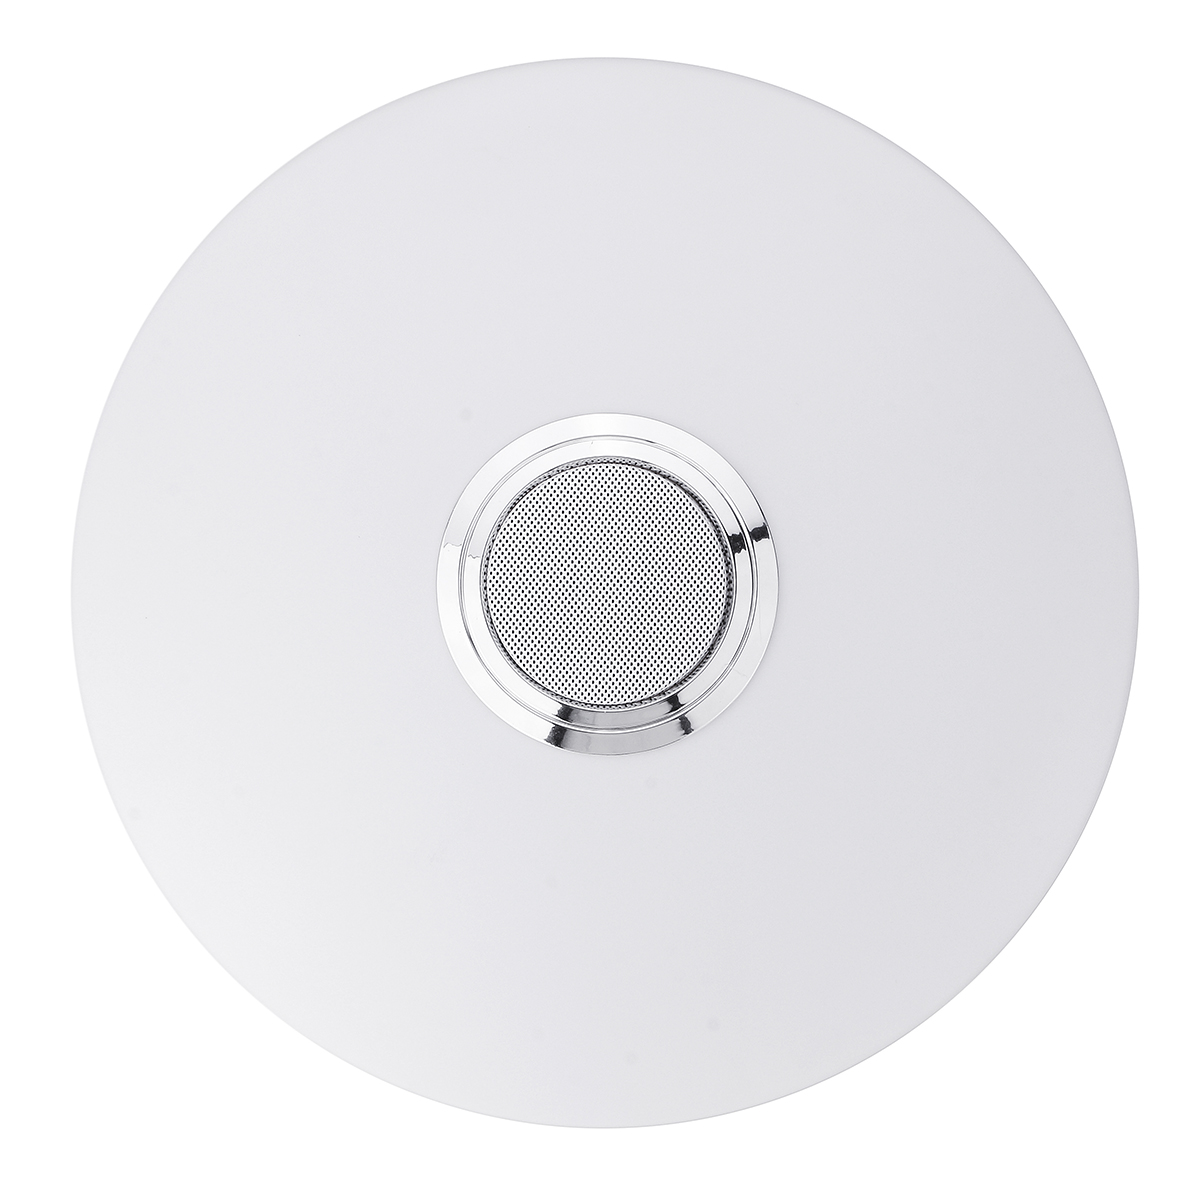 48W-Dimmable-LED-Music-Ceiling-Light-bluetooth-Speaker-Down-Fixture-Lamp-Modern-1606206-2